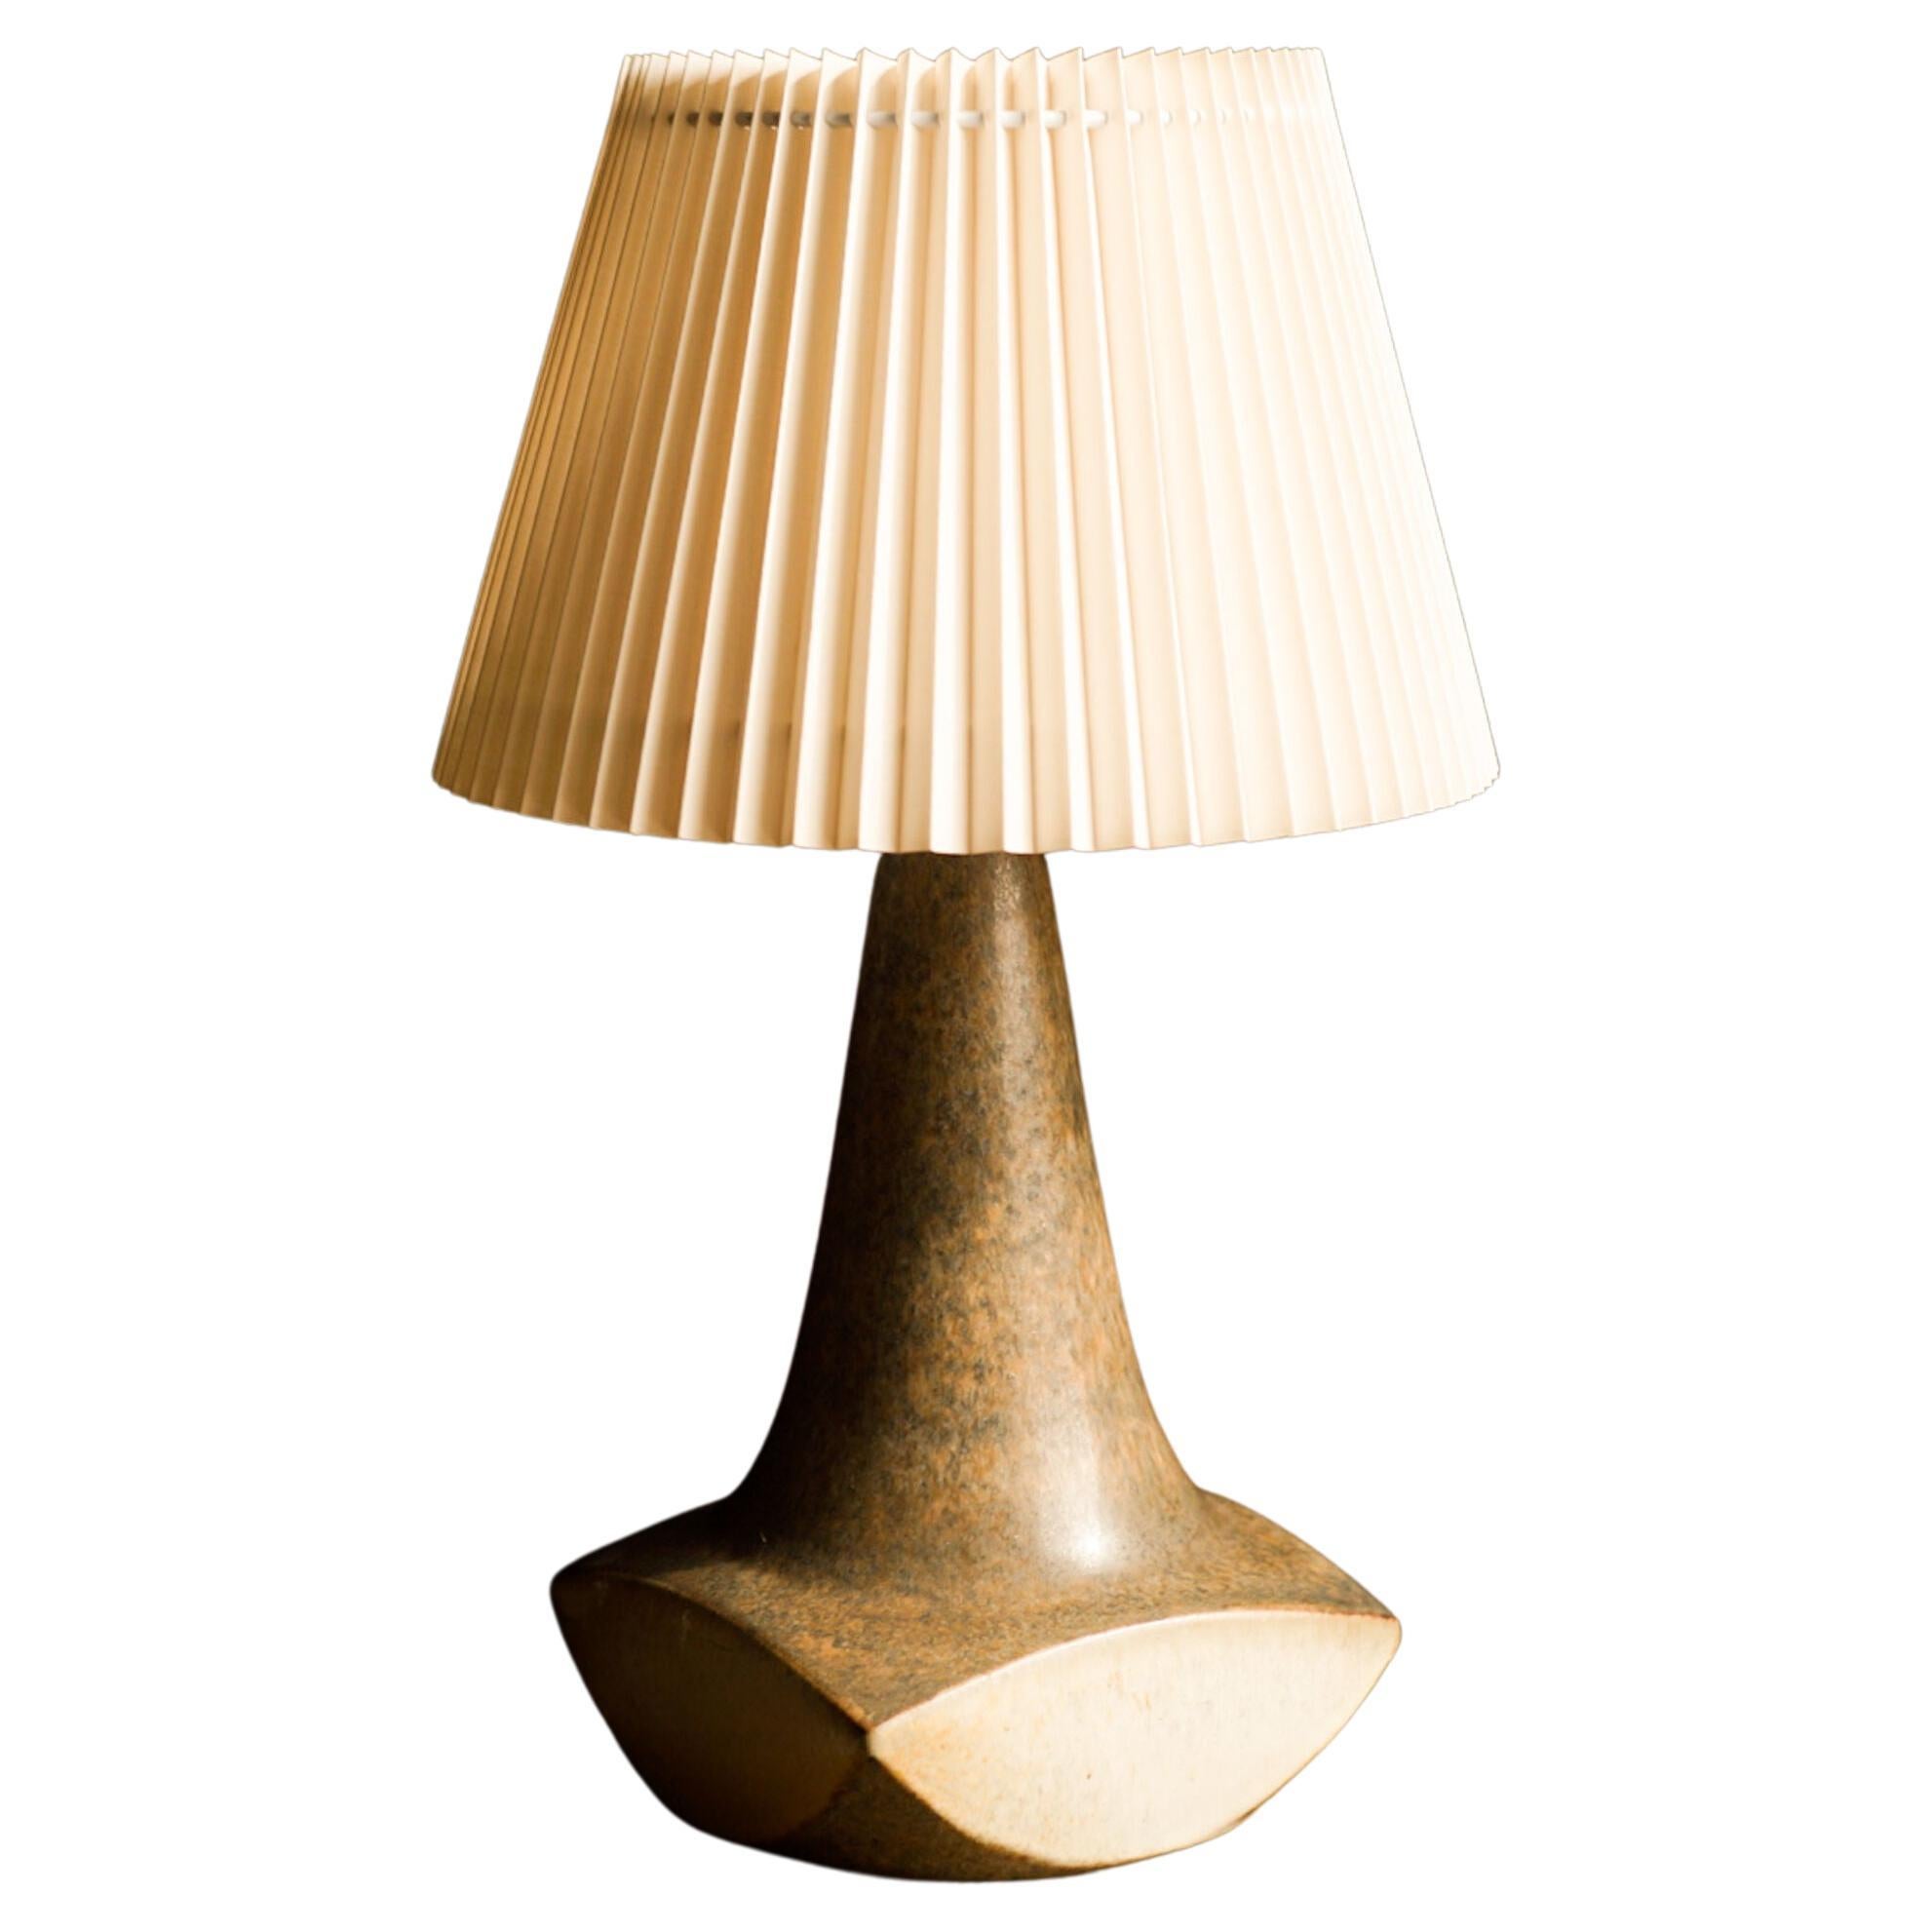 A stoneware table lamp handmade by Michael Andersen & Son located on the island of Bornholm in Denmark in the 1960s.

Stamped and signed on the base.

Sold without lampshade. Height includes socket. fully functional and in beautiful condition.